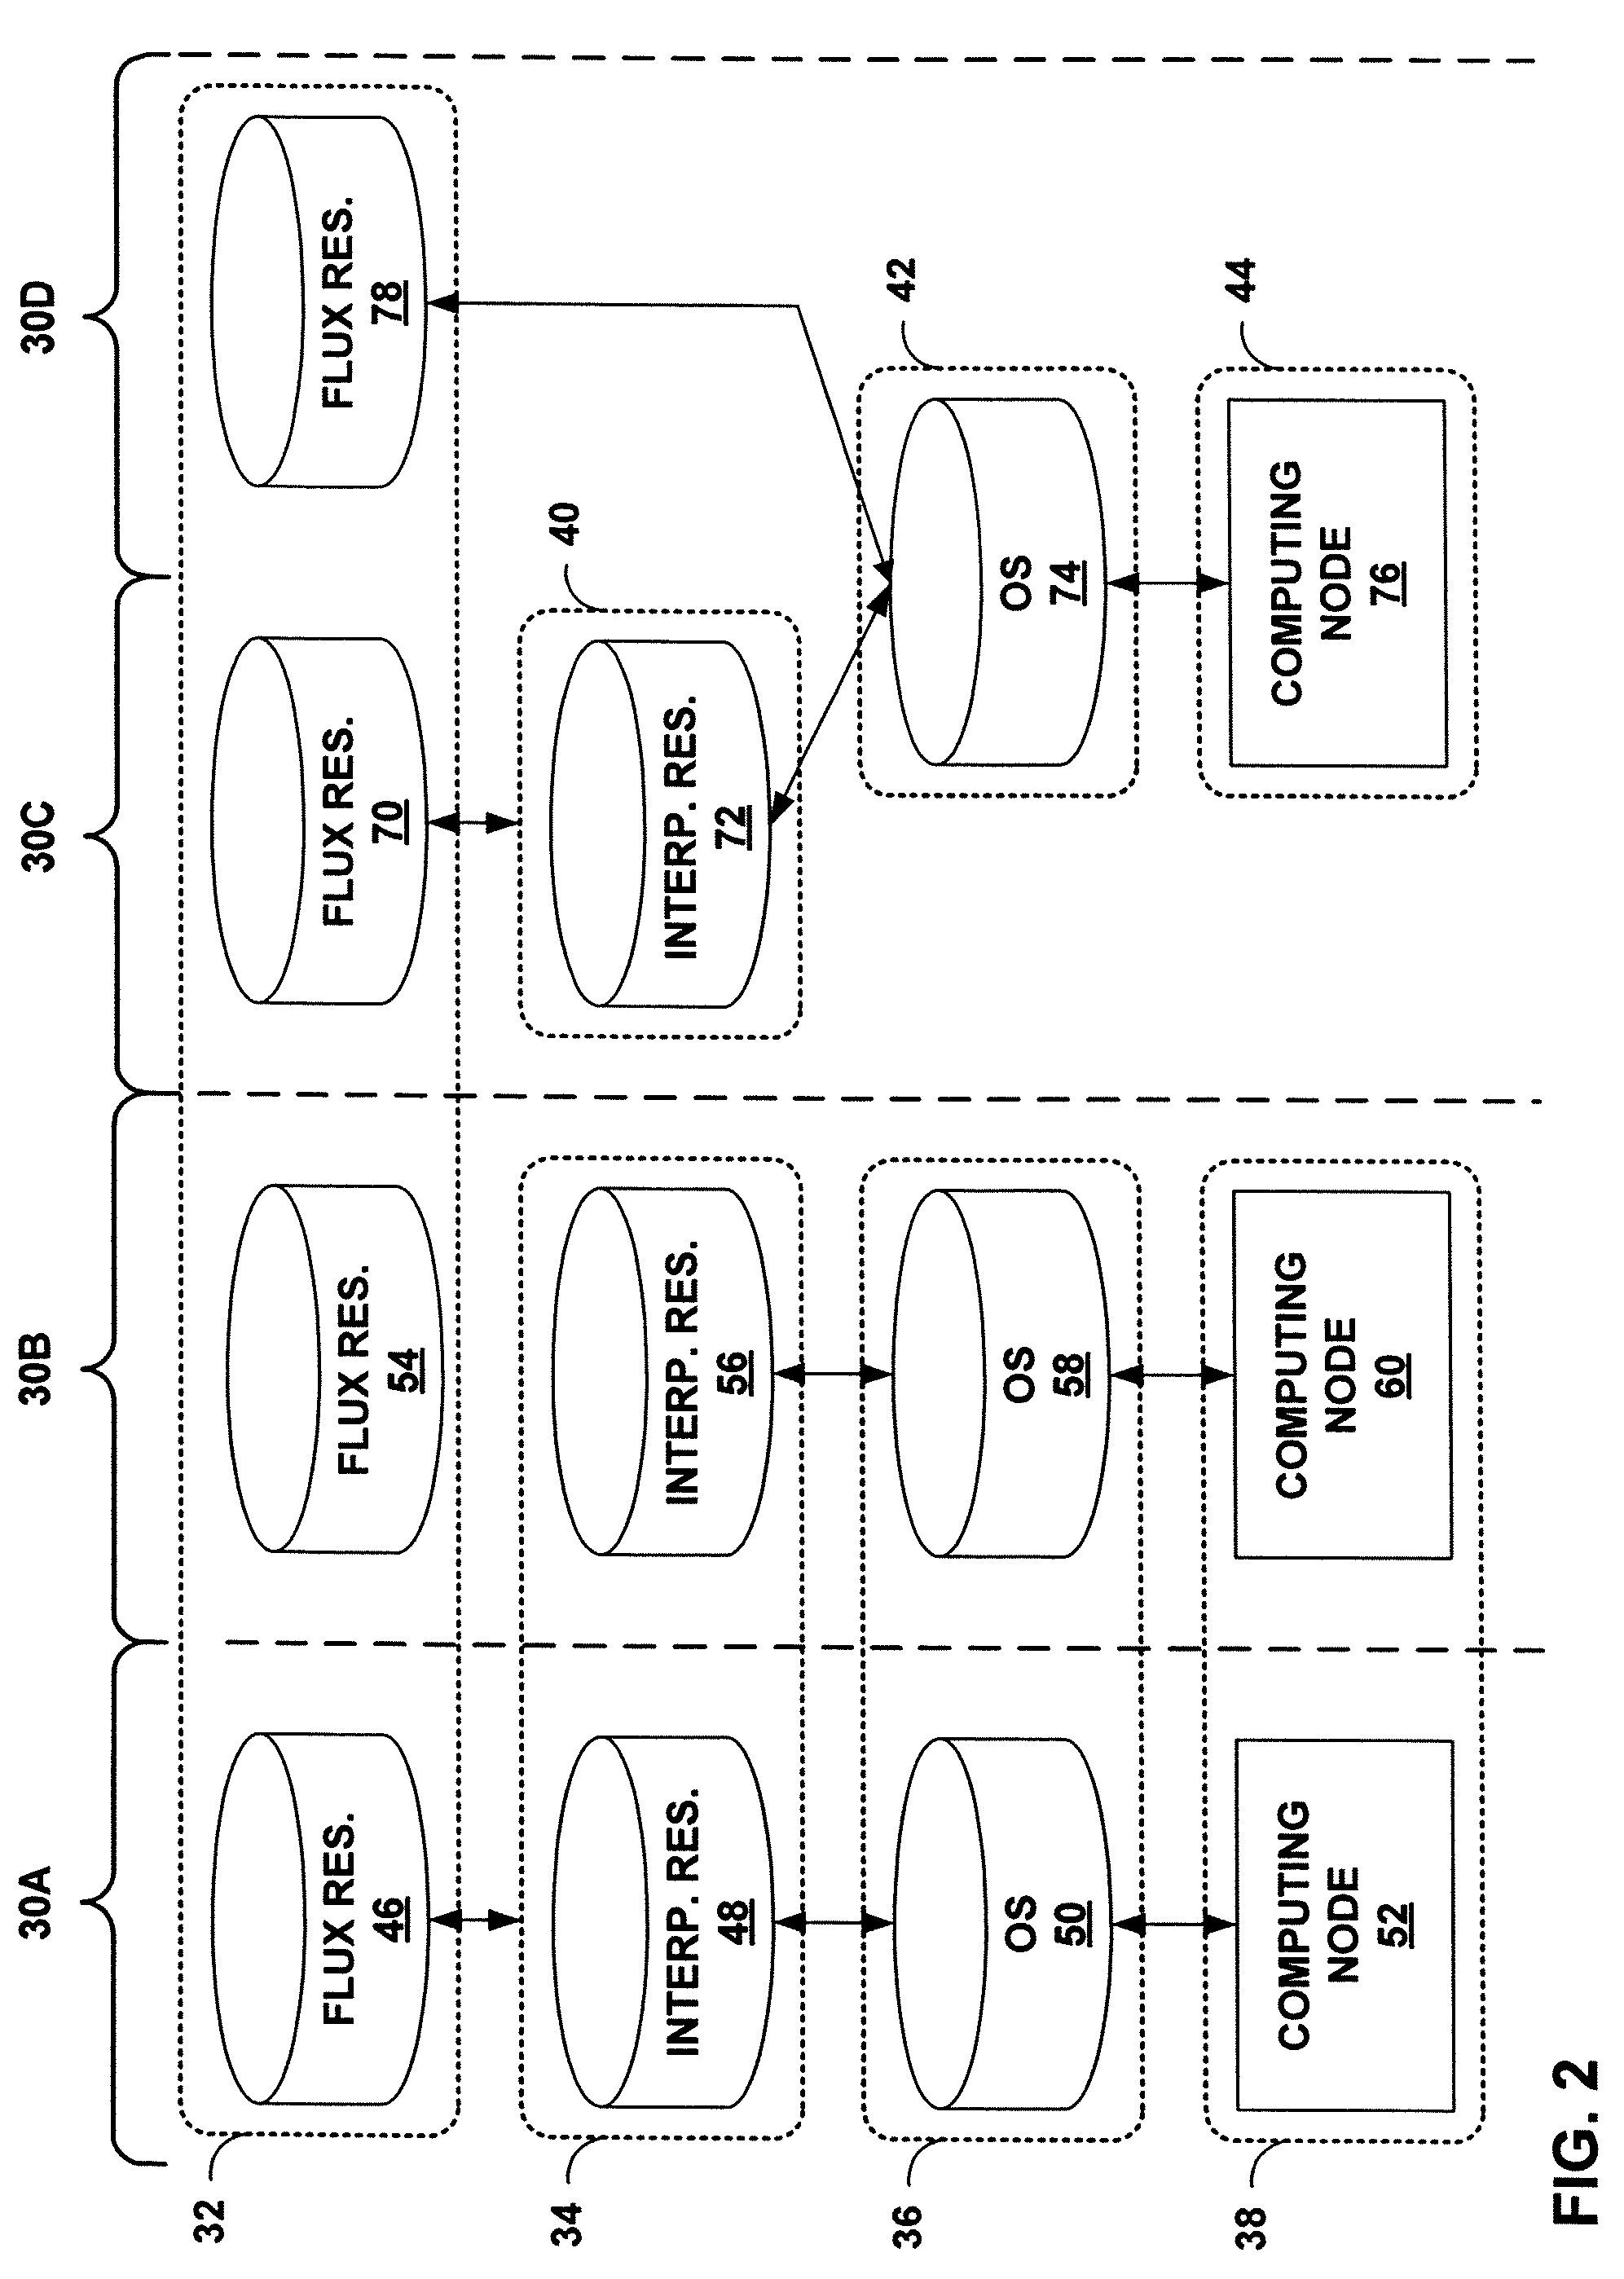 Autonomic control of a distributed computing system using finite state machines